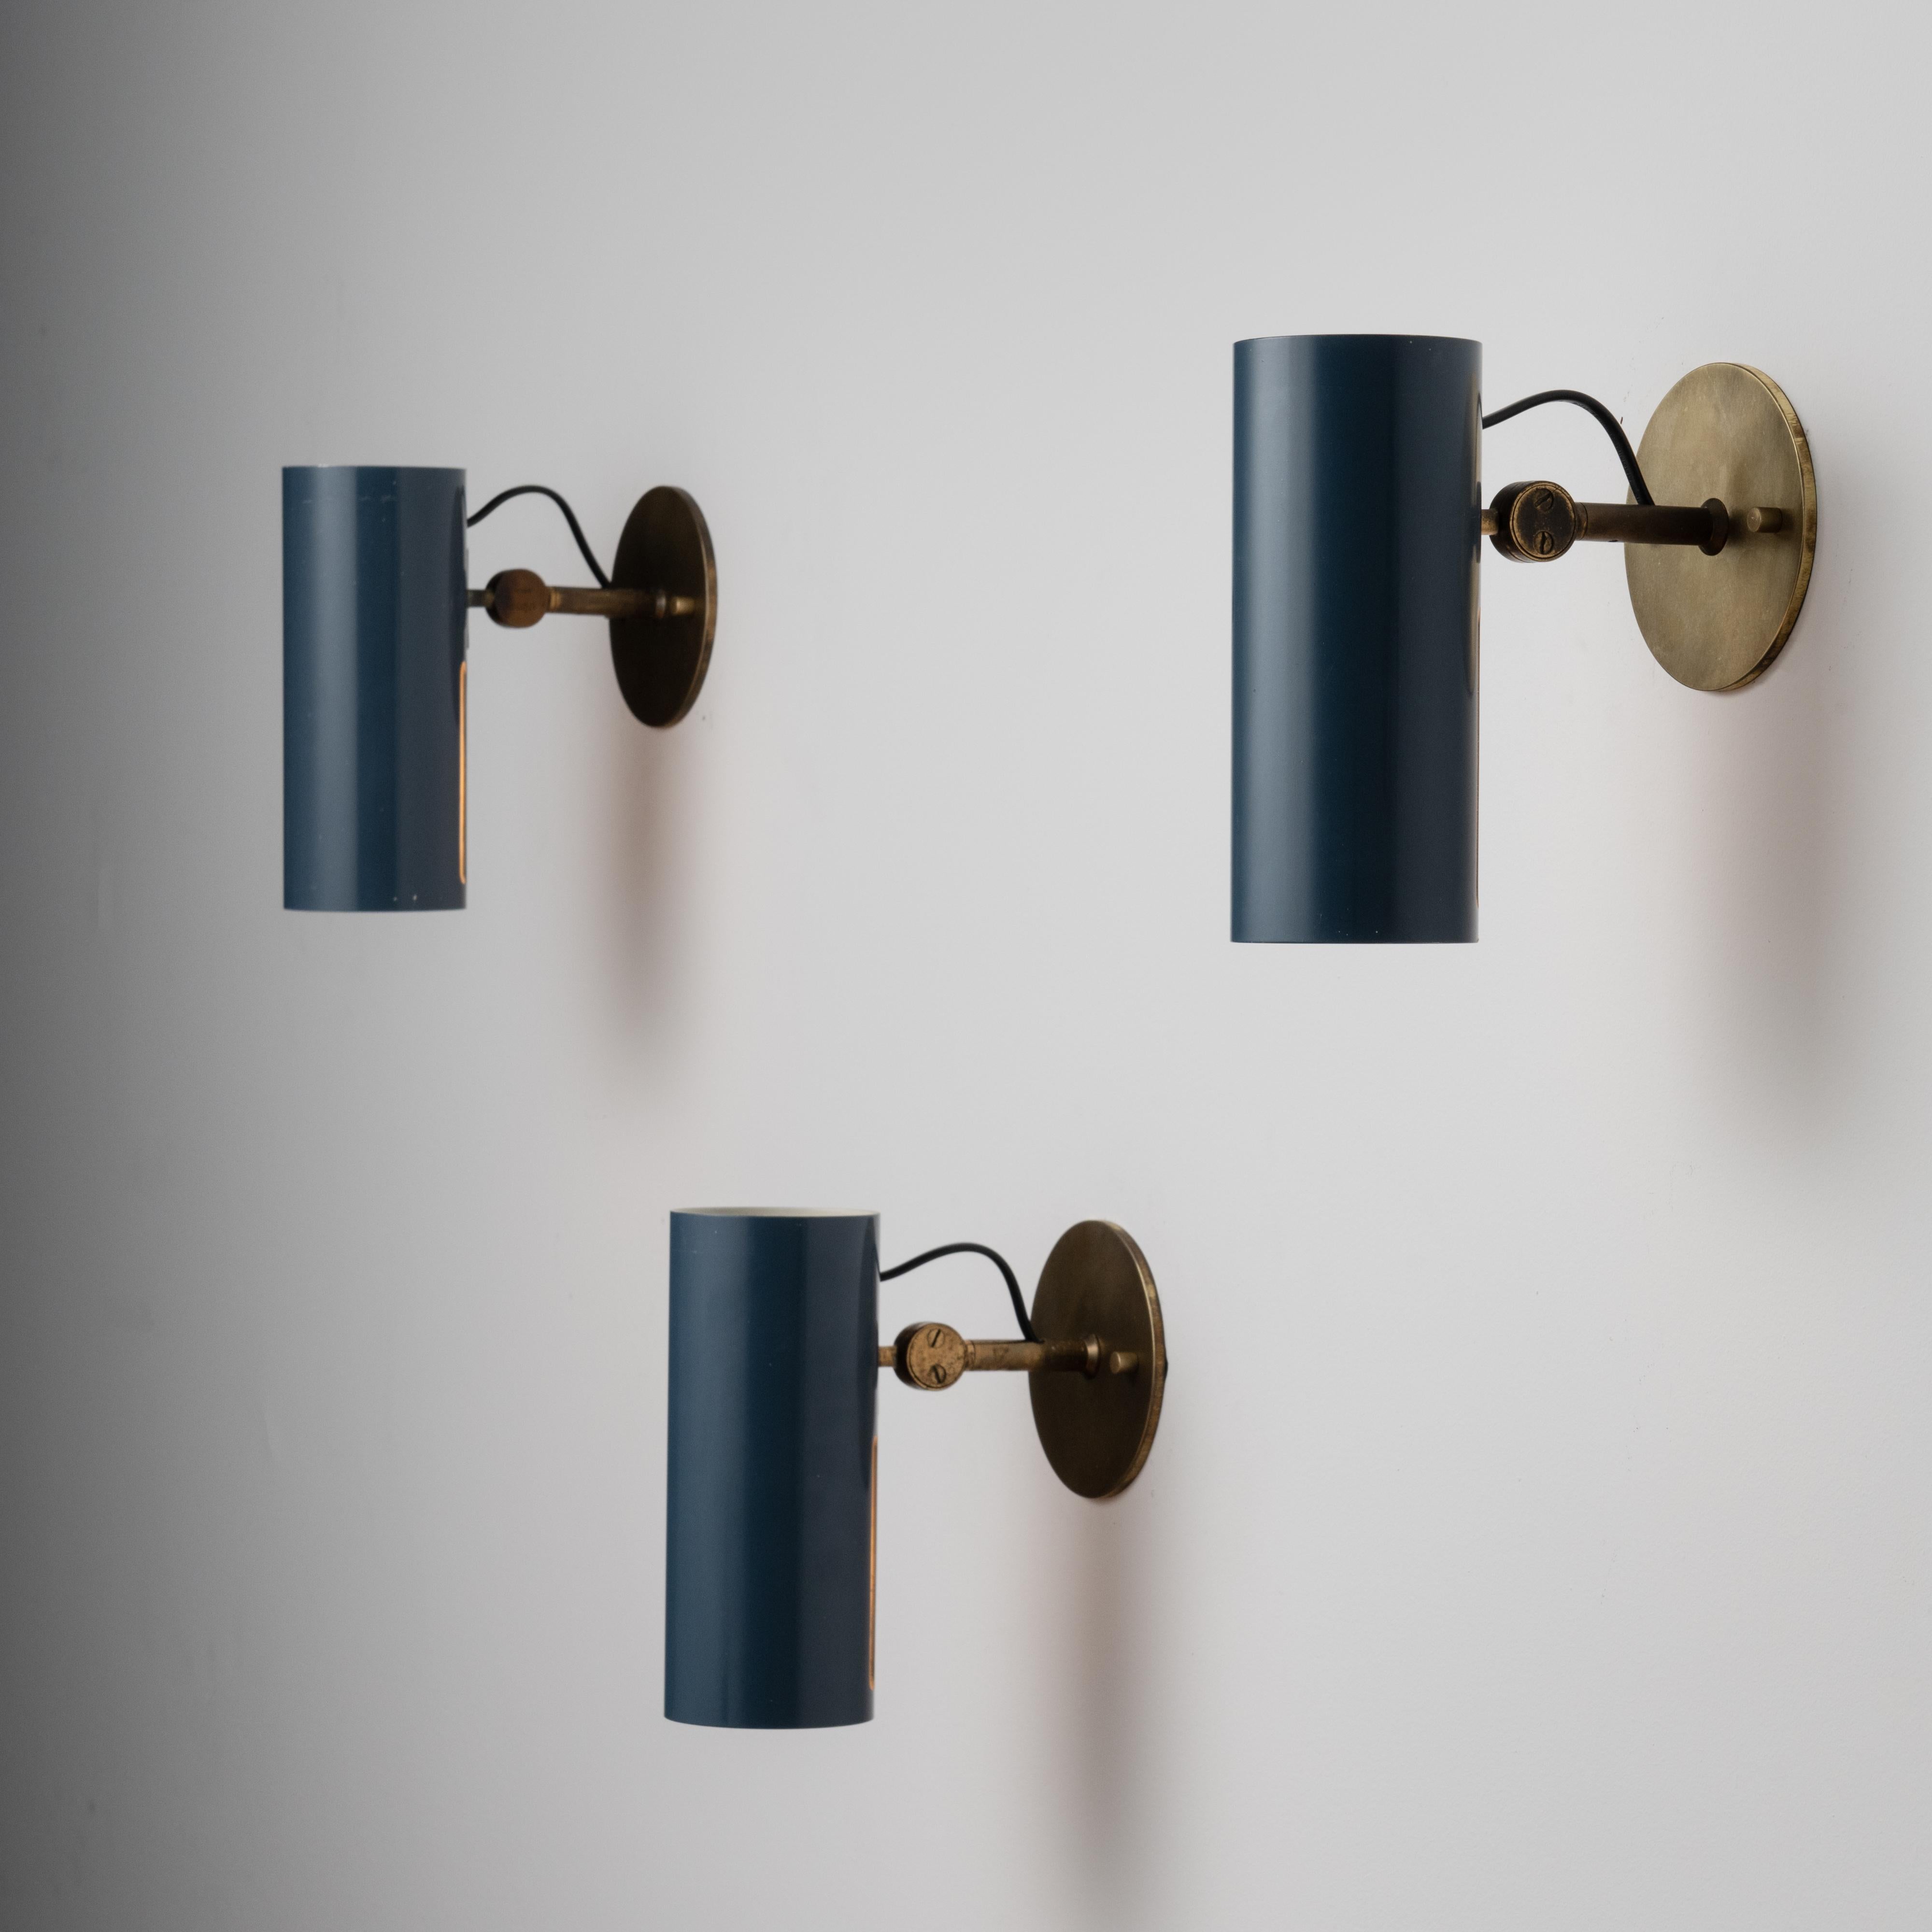 Mod. 2131 Sconces by Stilnovo. Designed and manufactured in Italy, circa the 1950s. Pivoting blue enameled cylinders work as utilitarian spotlights on these beautiful Stilnovo sconces. Brass armature and backplate represent the external components.